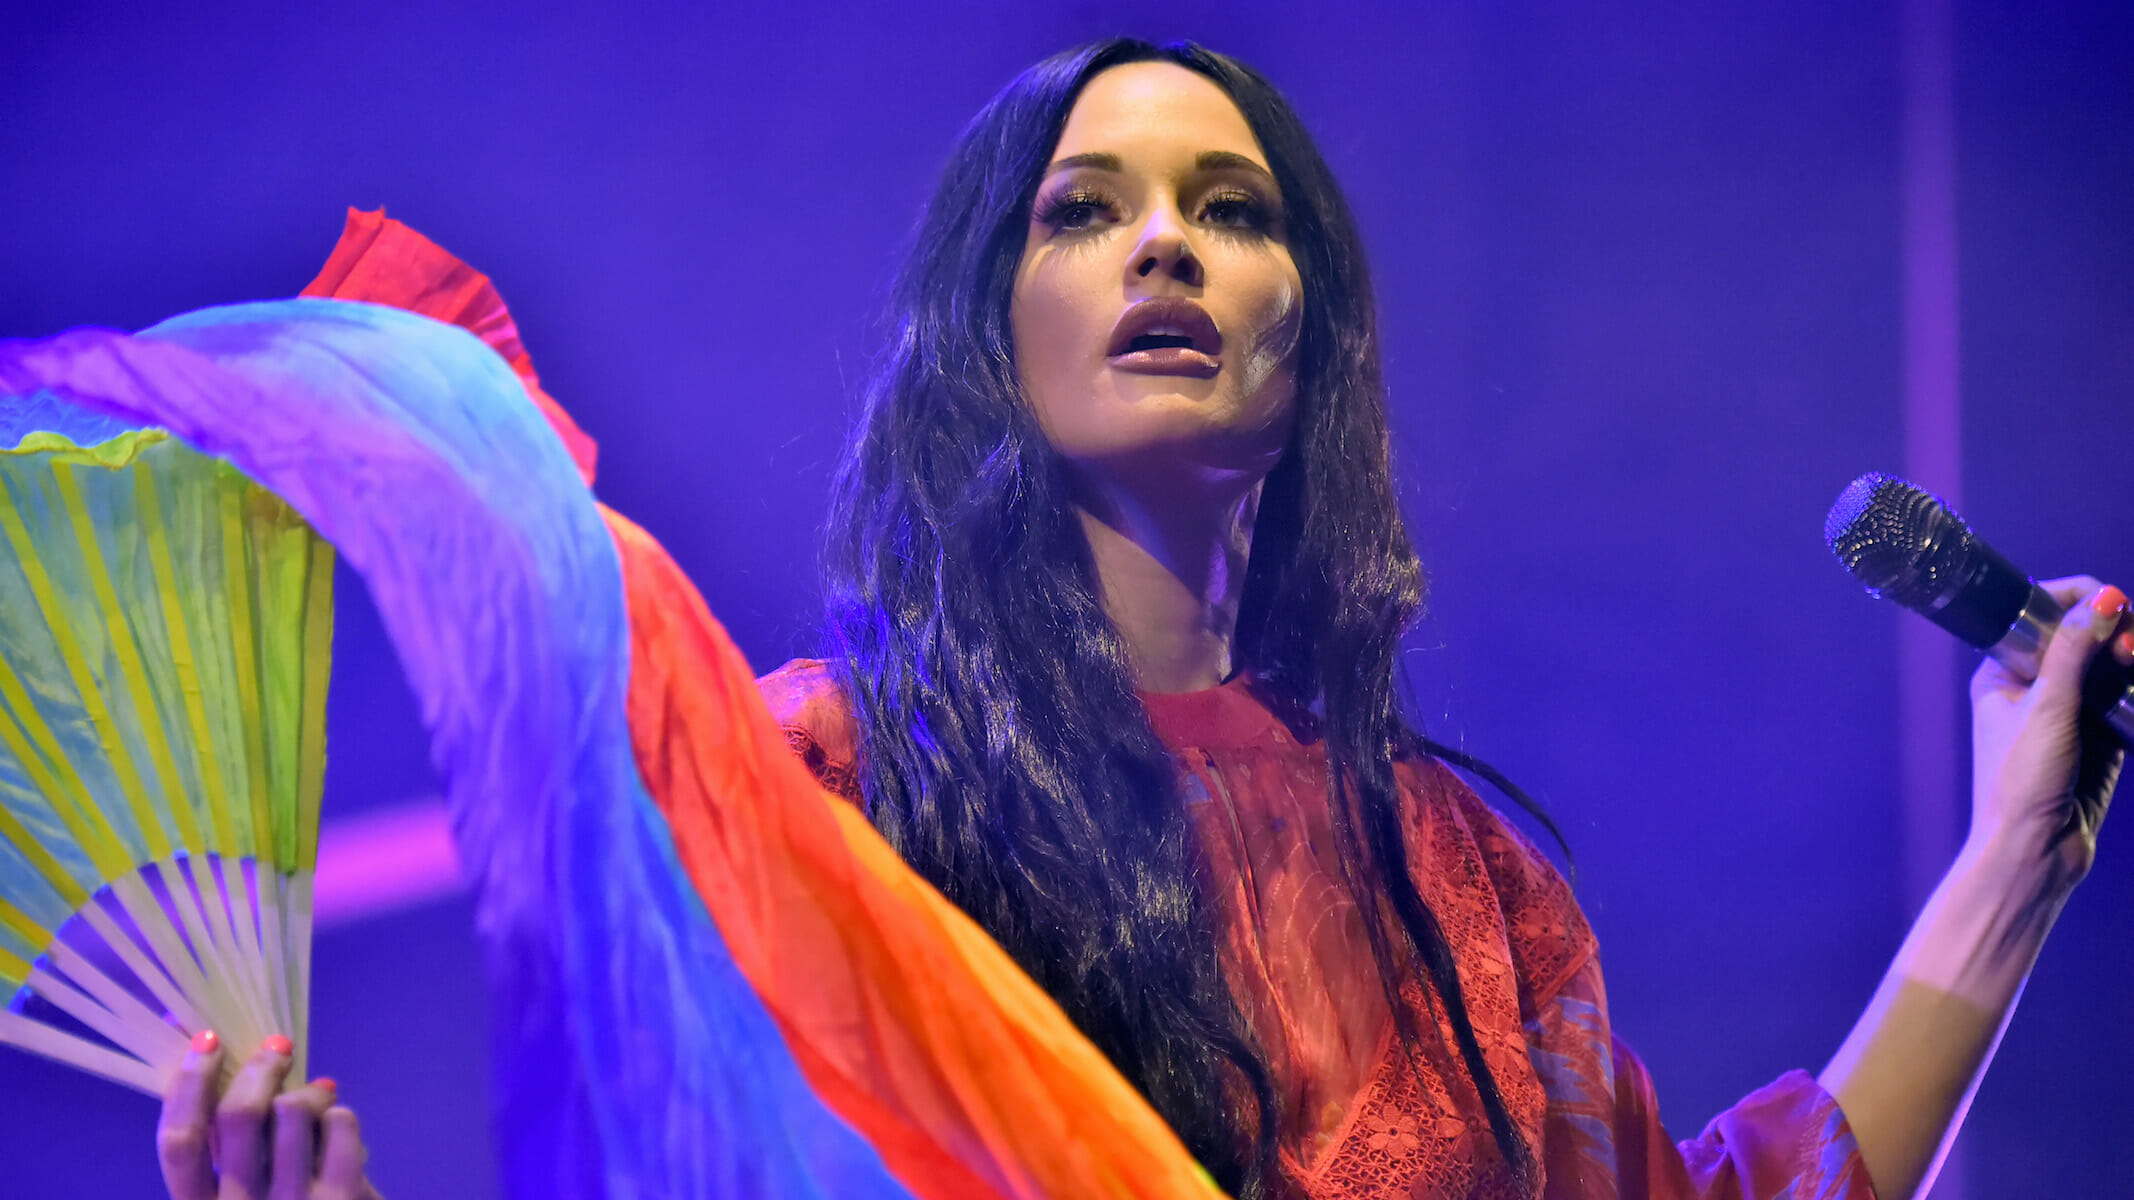 Bonnaroo 2019 Day 3 Recap: Kacey Musgraves, John Prine, The Lonely Island and More